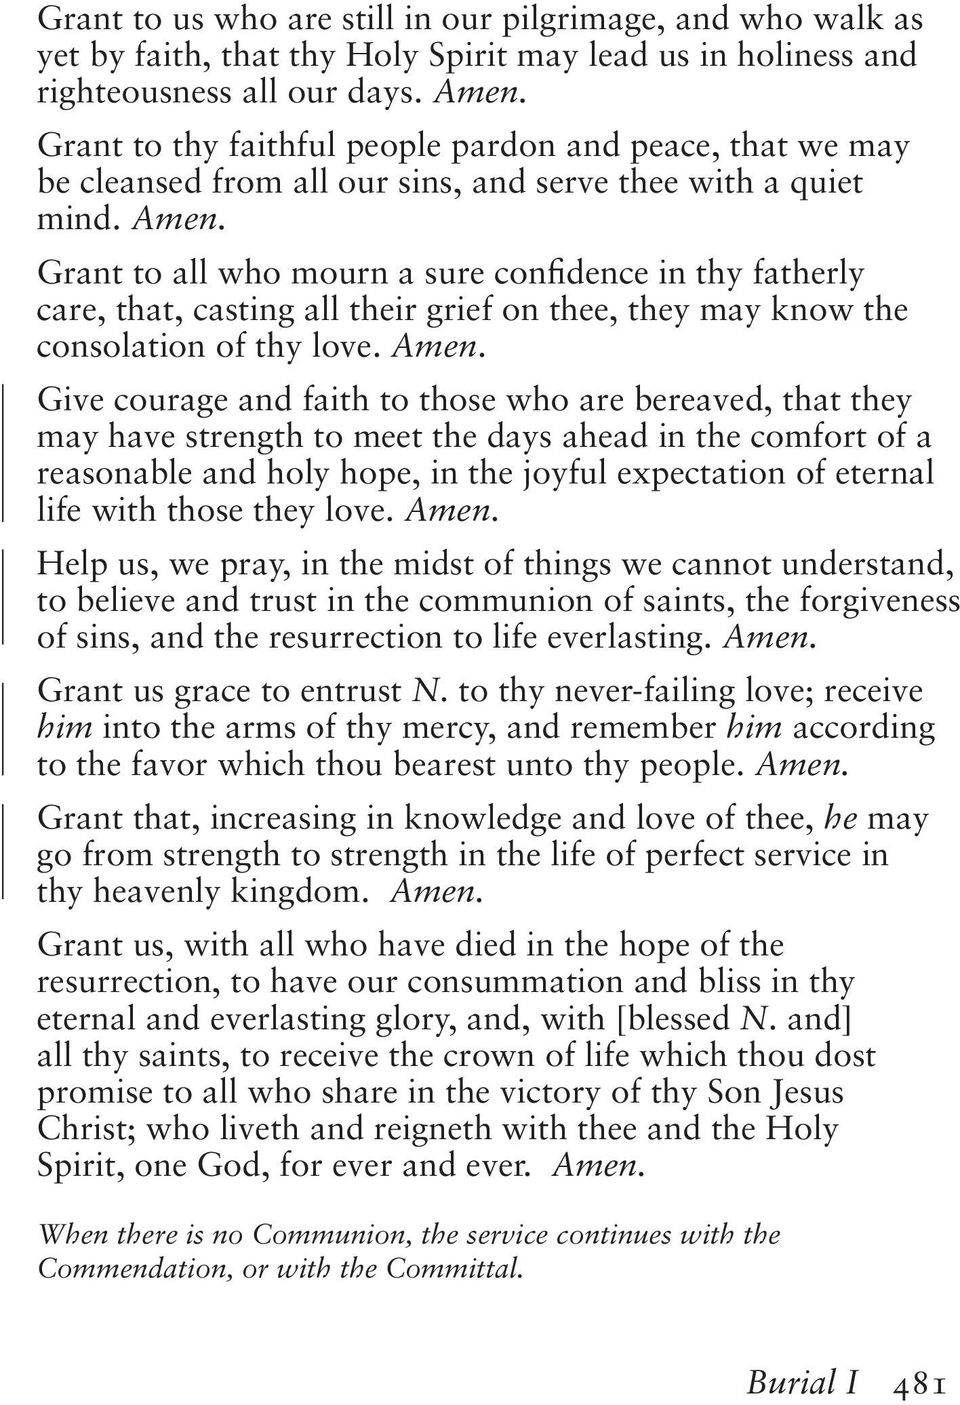 Grant to all who mourn a sure confidence in thy fatherly care, that, casting all their grief on thee, they may know the consolation of thy love. Amen.